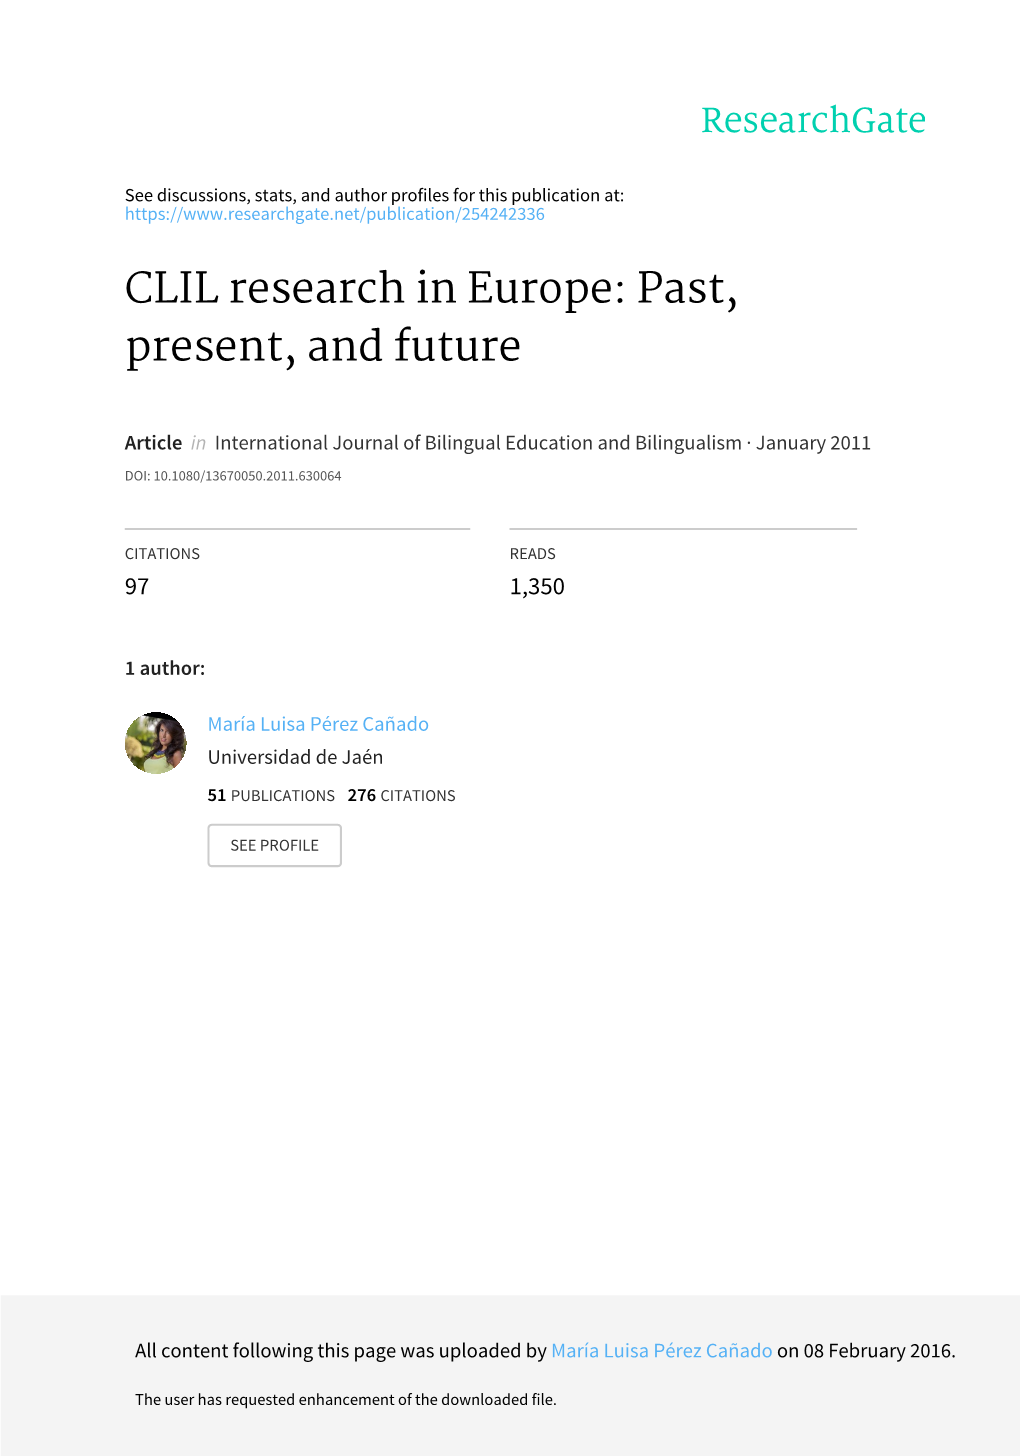 CLIL Research in Europe: Past, Present, and Future